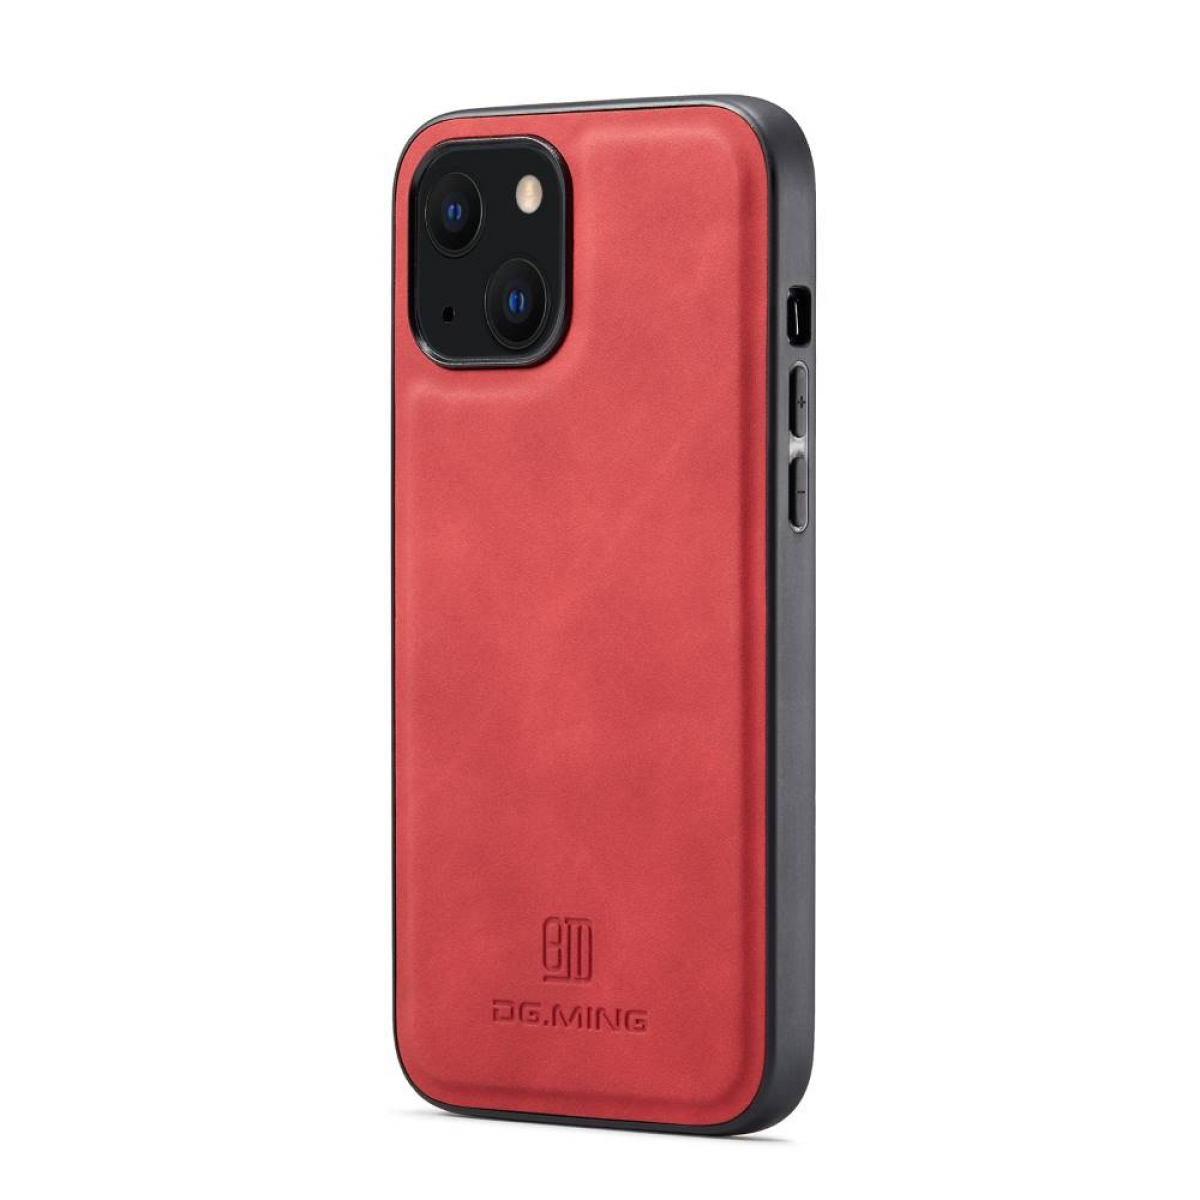 M2 Mini, Rot 13 Backcover, Apple, MING iPhone 2in1, DG